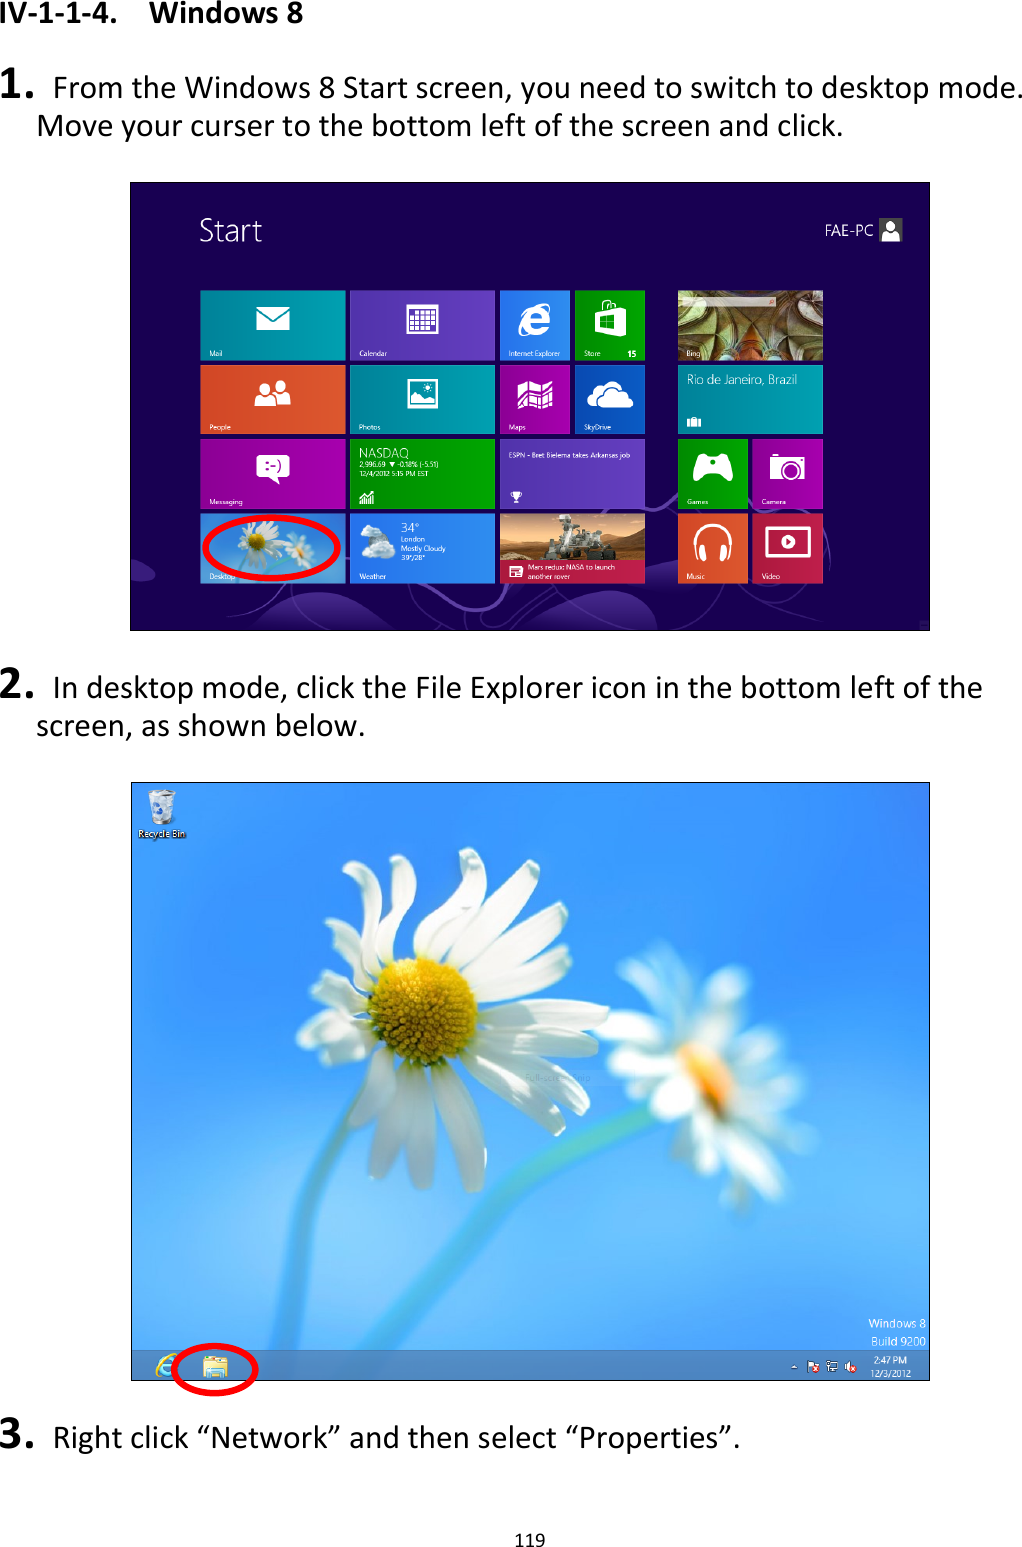 119  IV-1-1-4.  Windows 8  1.   From the Windows 8 Start screen, you need to switch to desktop mode. Move your curser to the bottom left of the screen and click.    2.   In desktop mode, click the File Explorer icon in the bottom left of the screen, as shown below.    3.   Right click “Network” and then select “Properties”.  